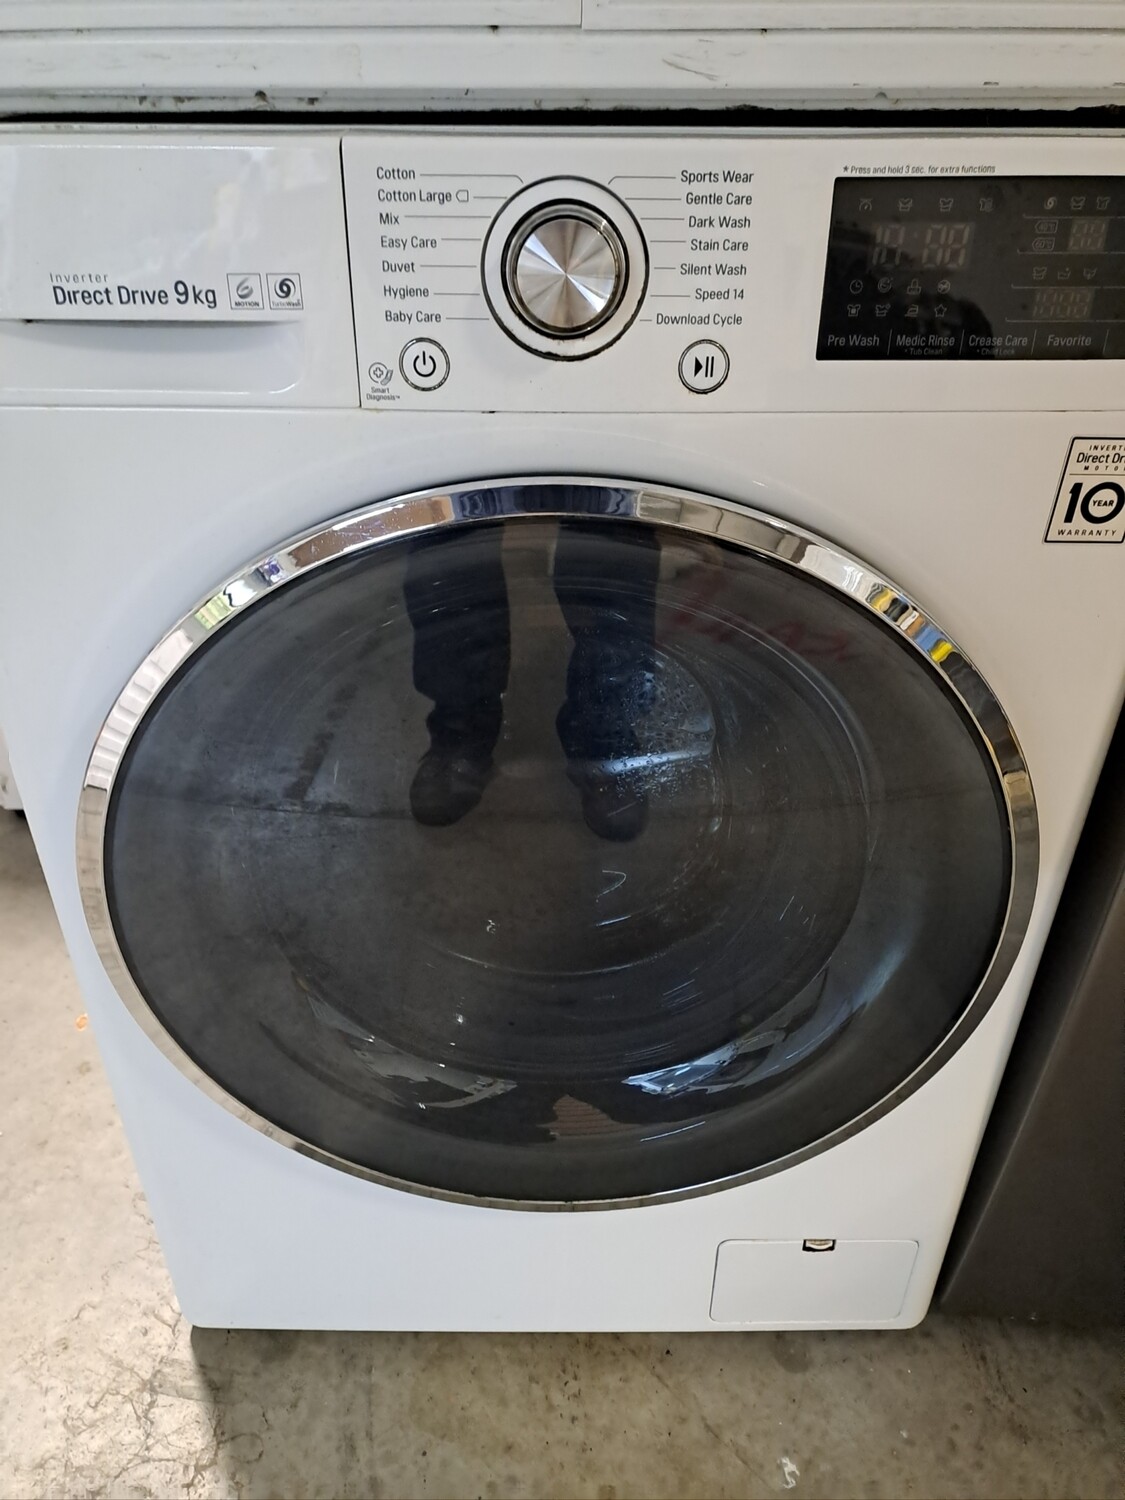 LG FH4U2VCN2 9kg Load, 1400 Spin Washing Machine - White - Refurbished - 6 Month Guarantee. This item is located in our Whitby Road Shop 